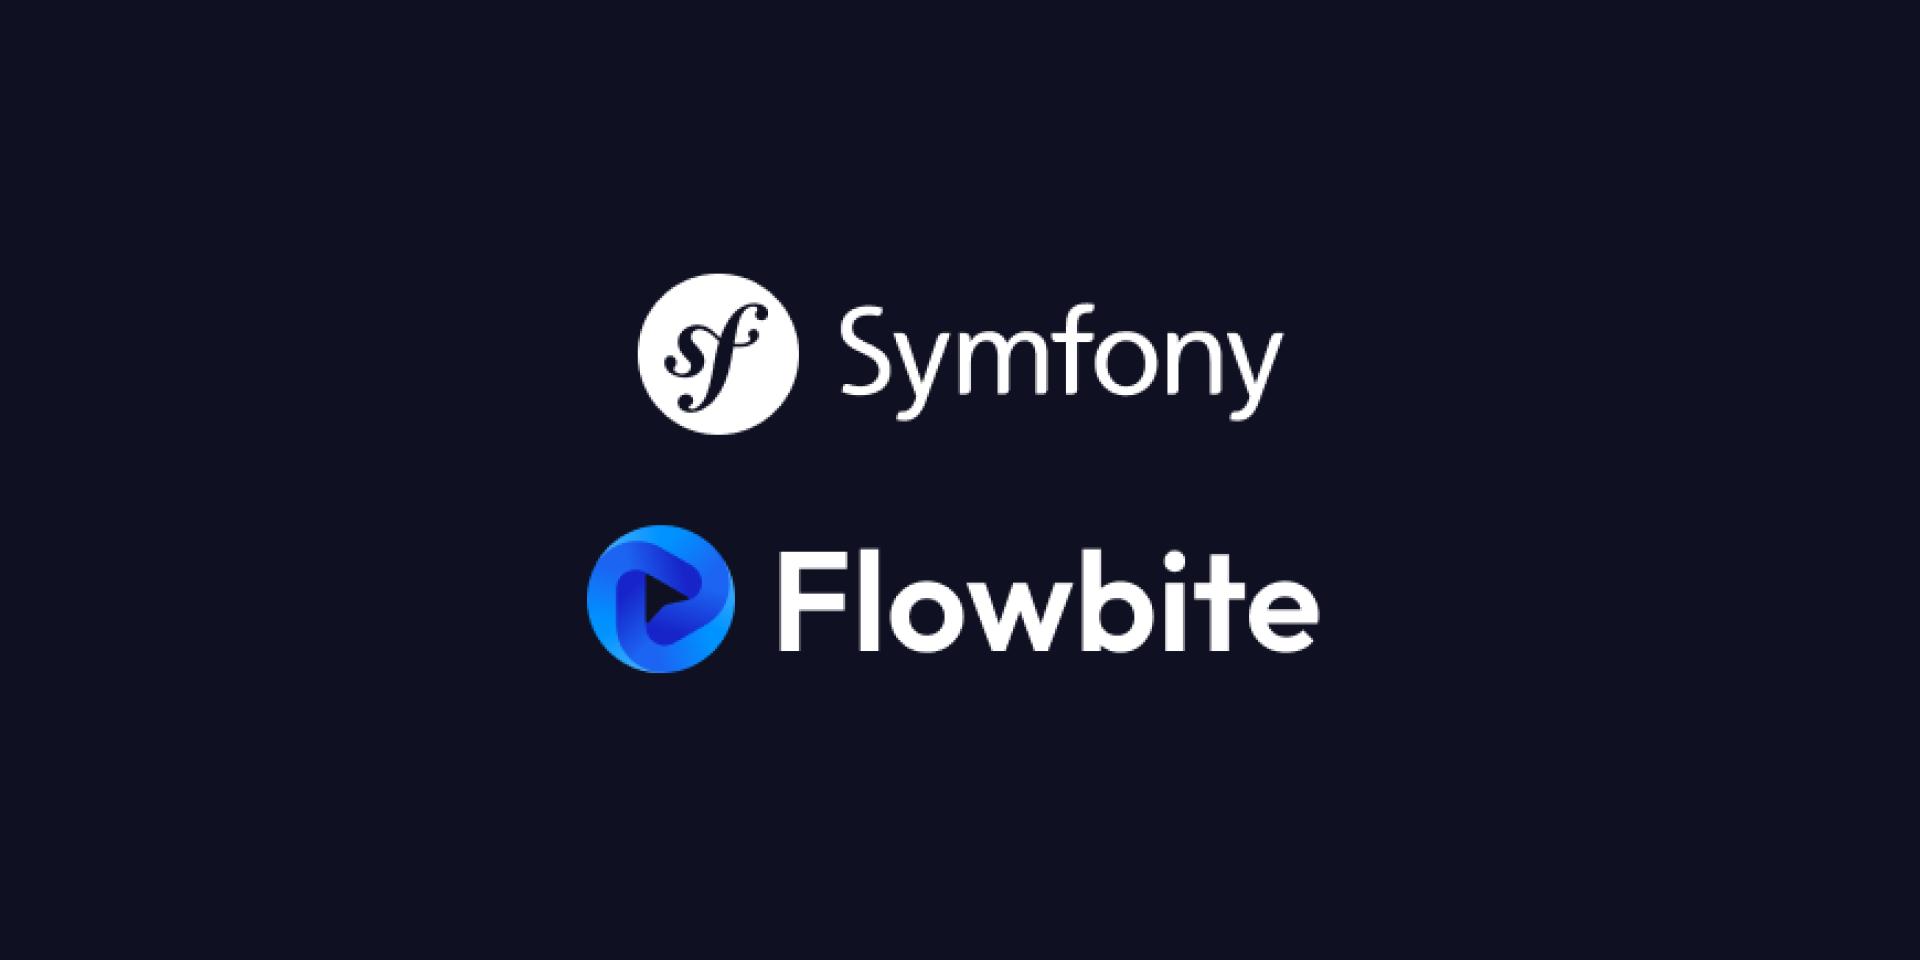 How to install Symfony with Flowbite and Tailwind CSS